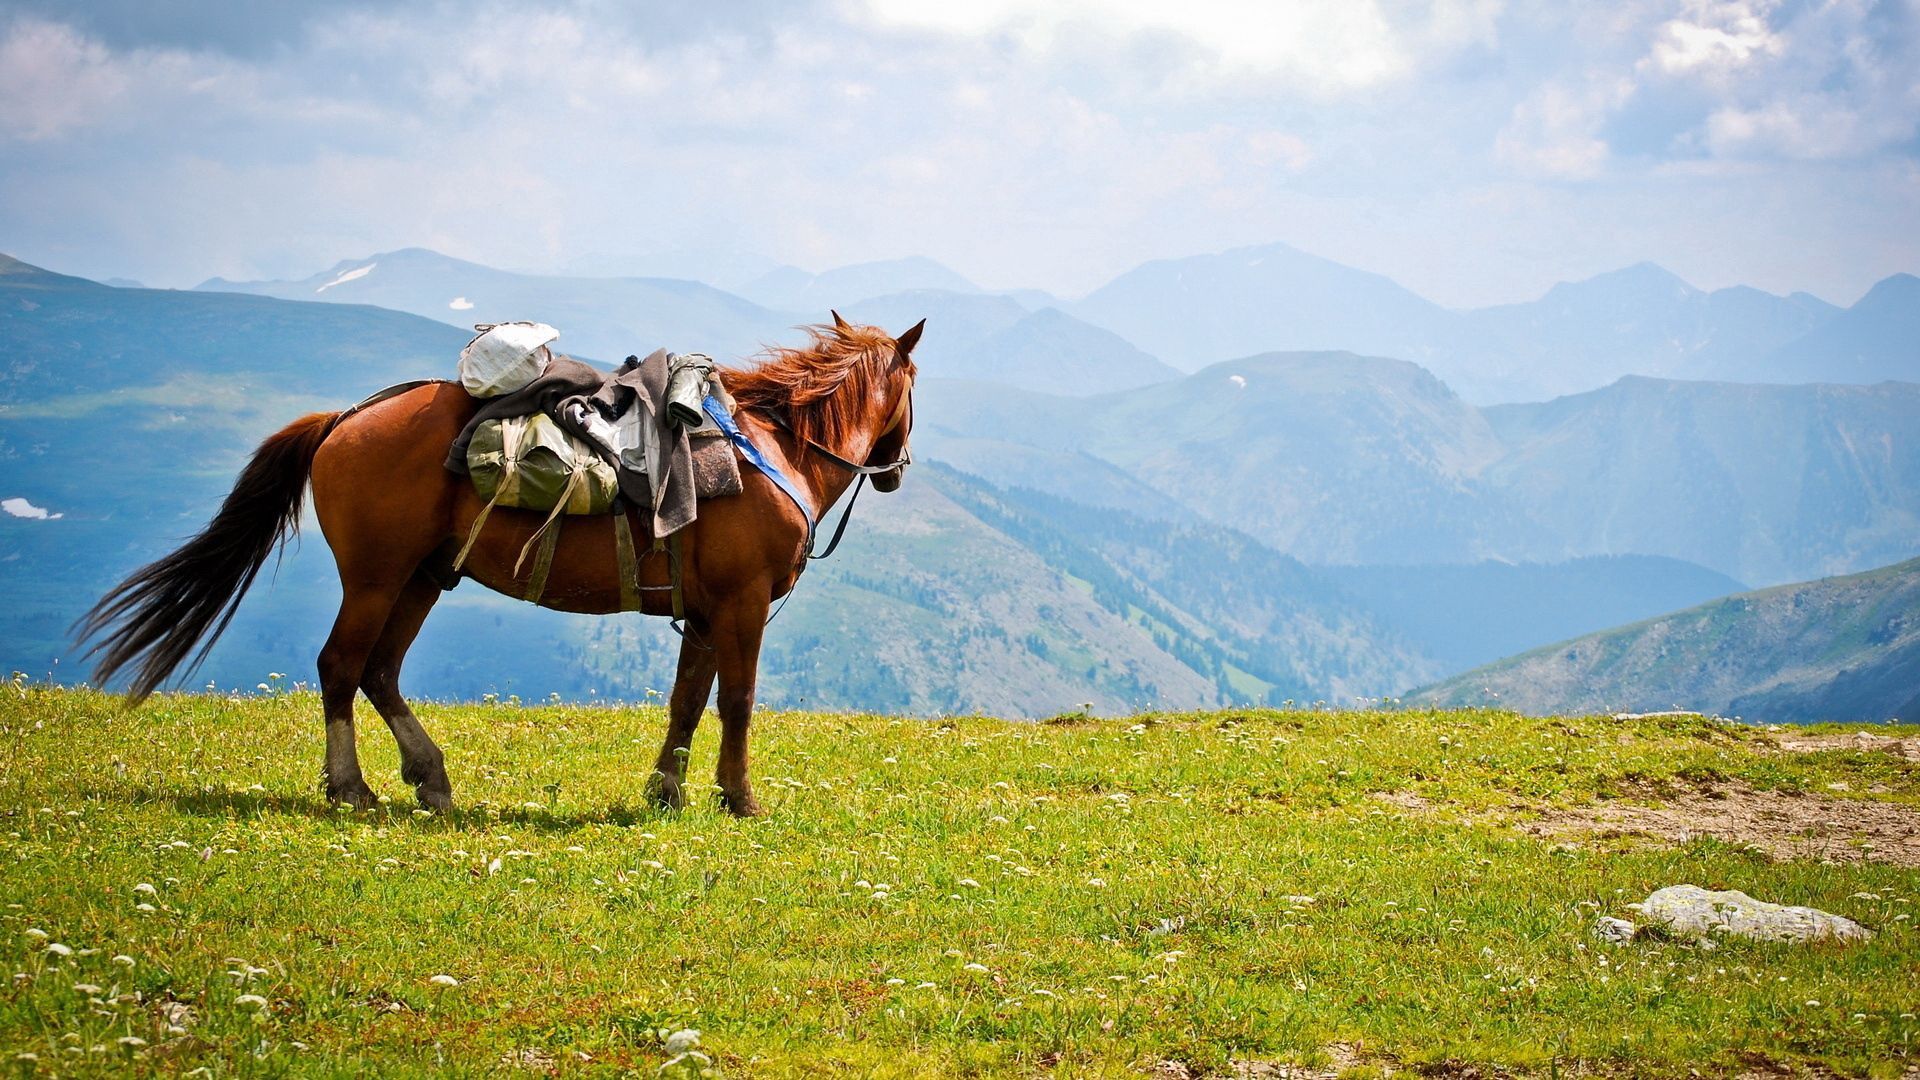 Download wallpaper 1920x1080 horse, saddle, mountains HD background